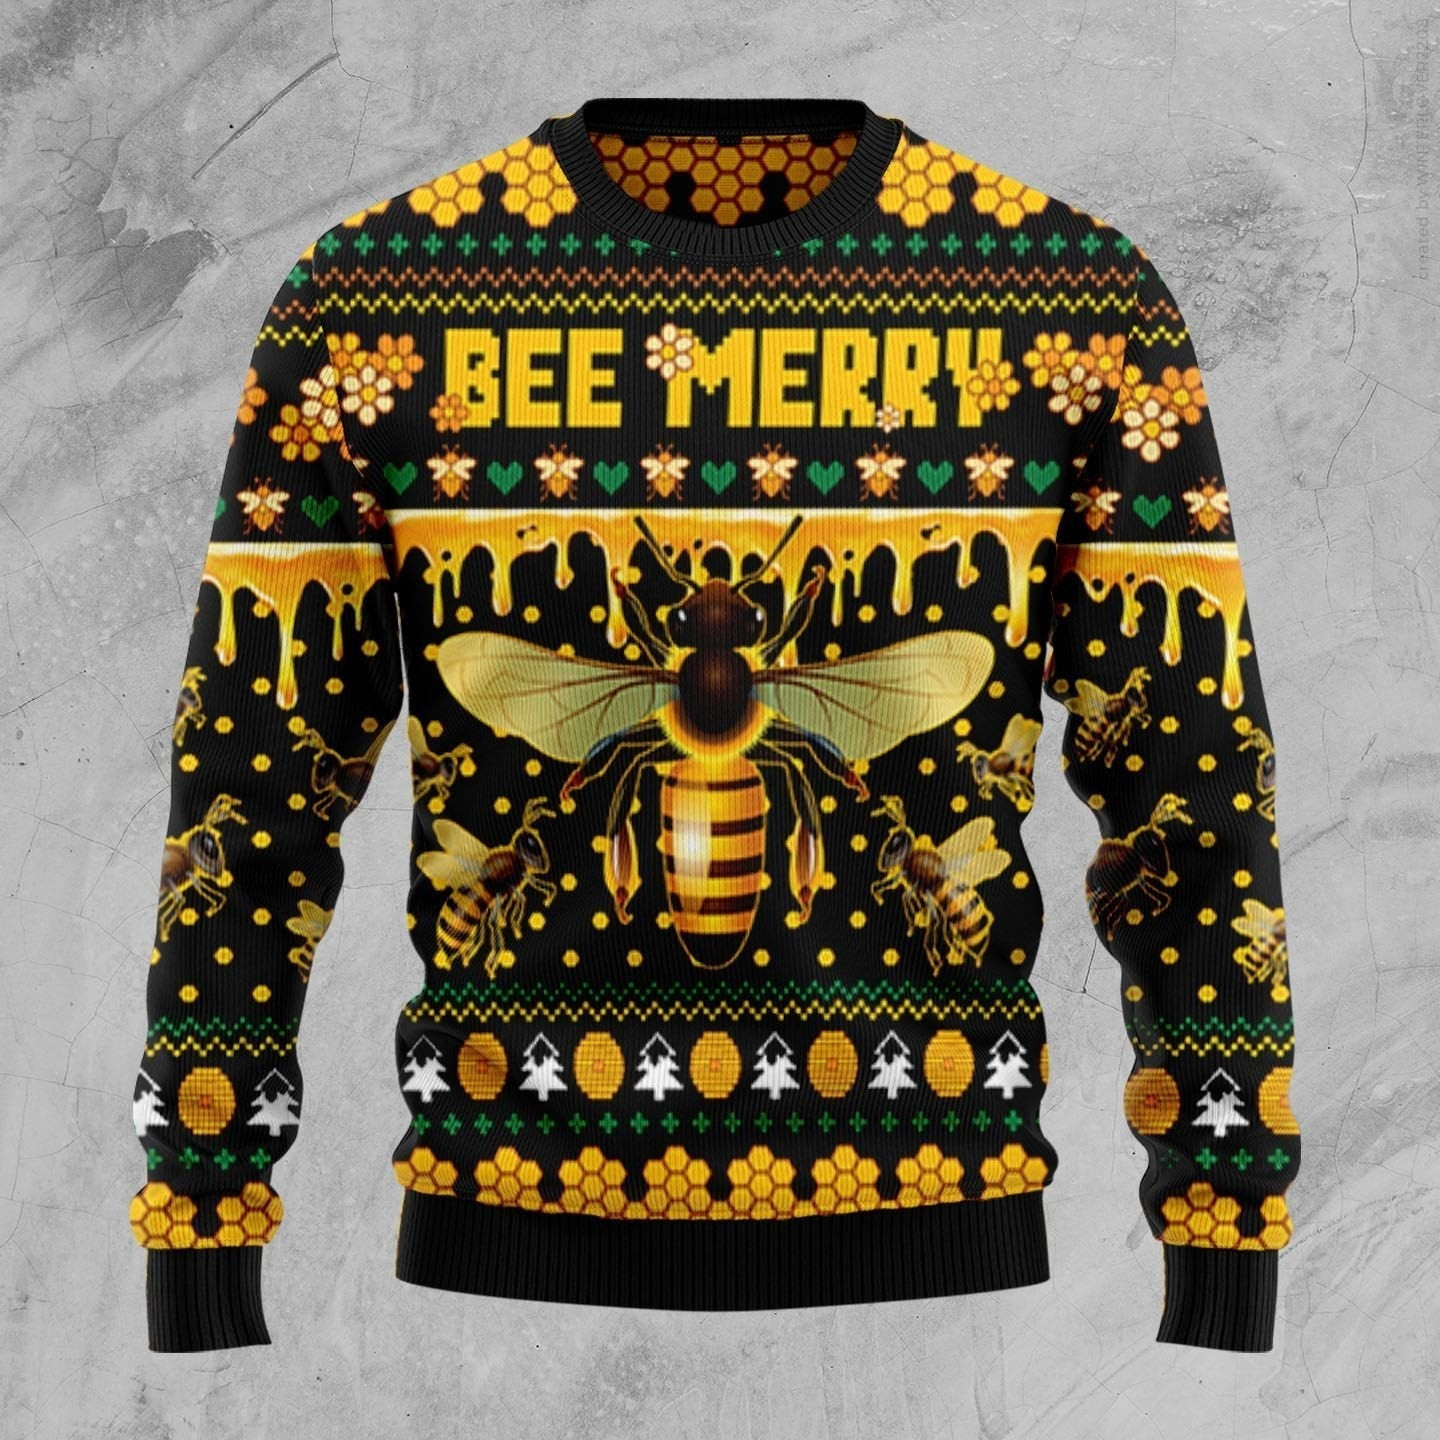 Bee Merry Ugly Christmas Sweater Ugly Sweater For Men Women